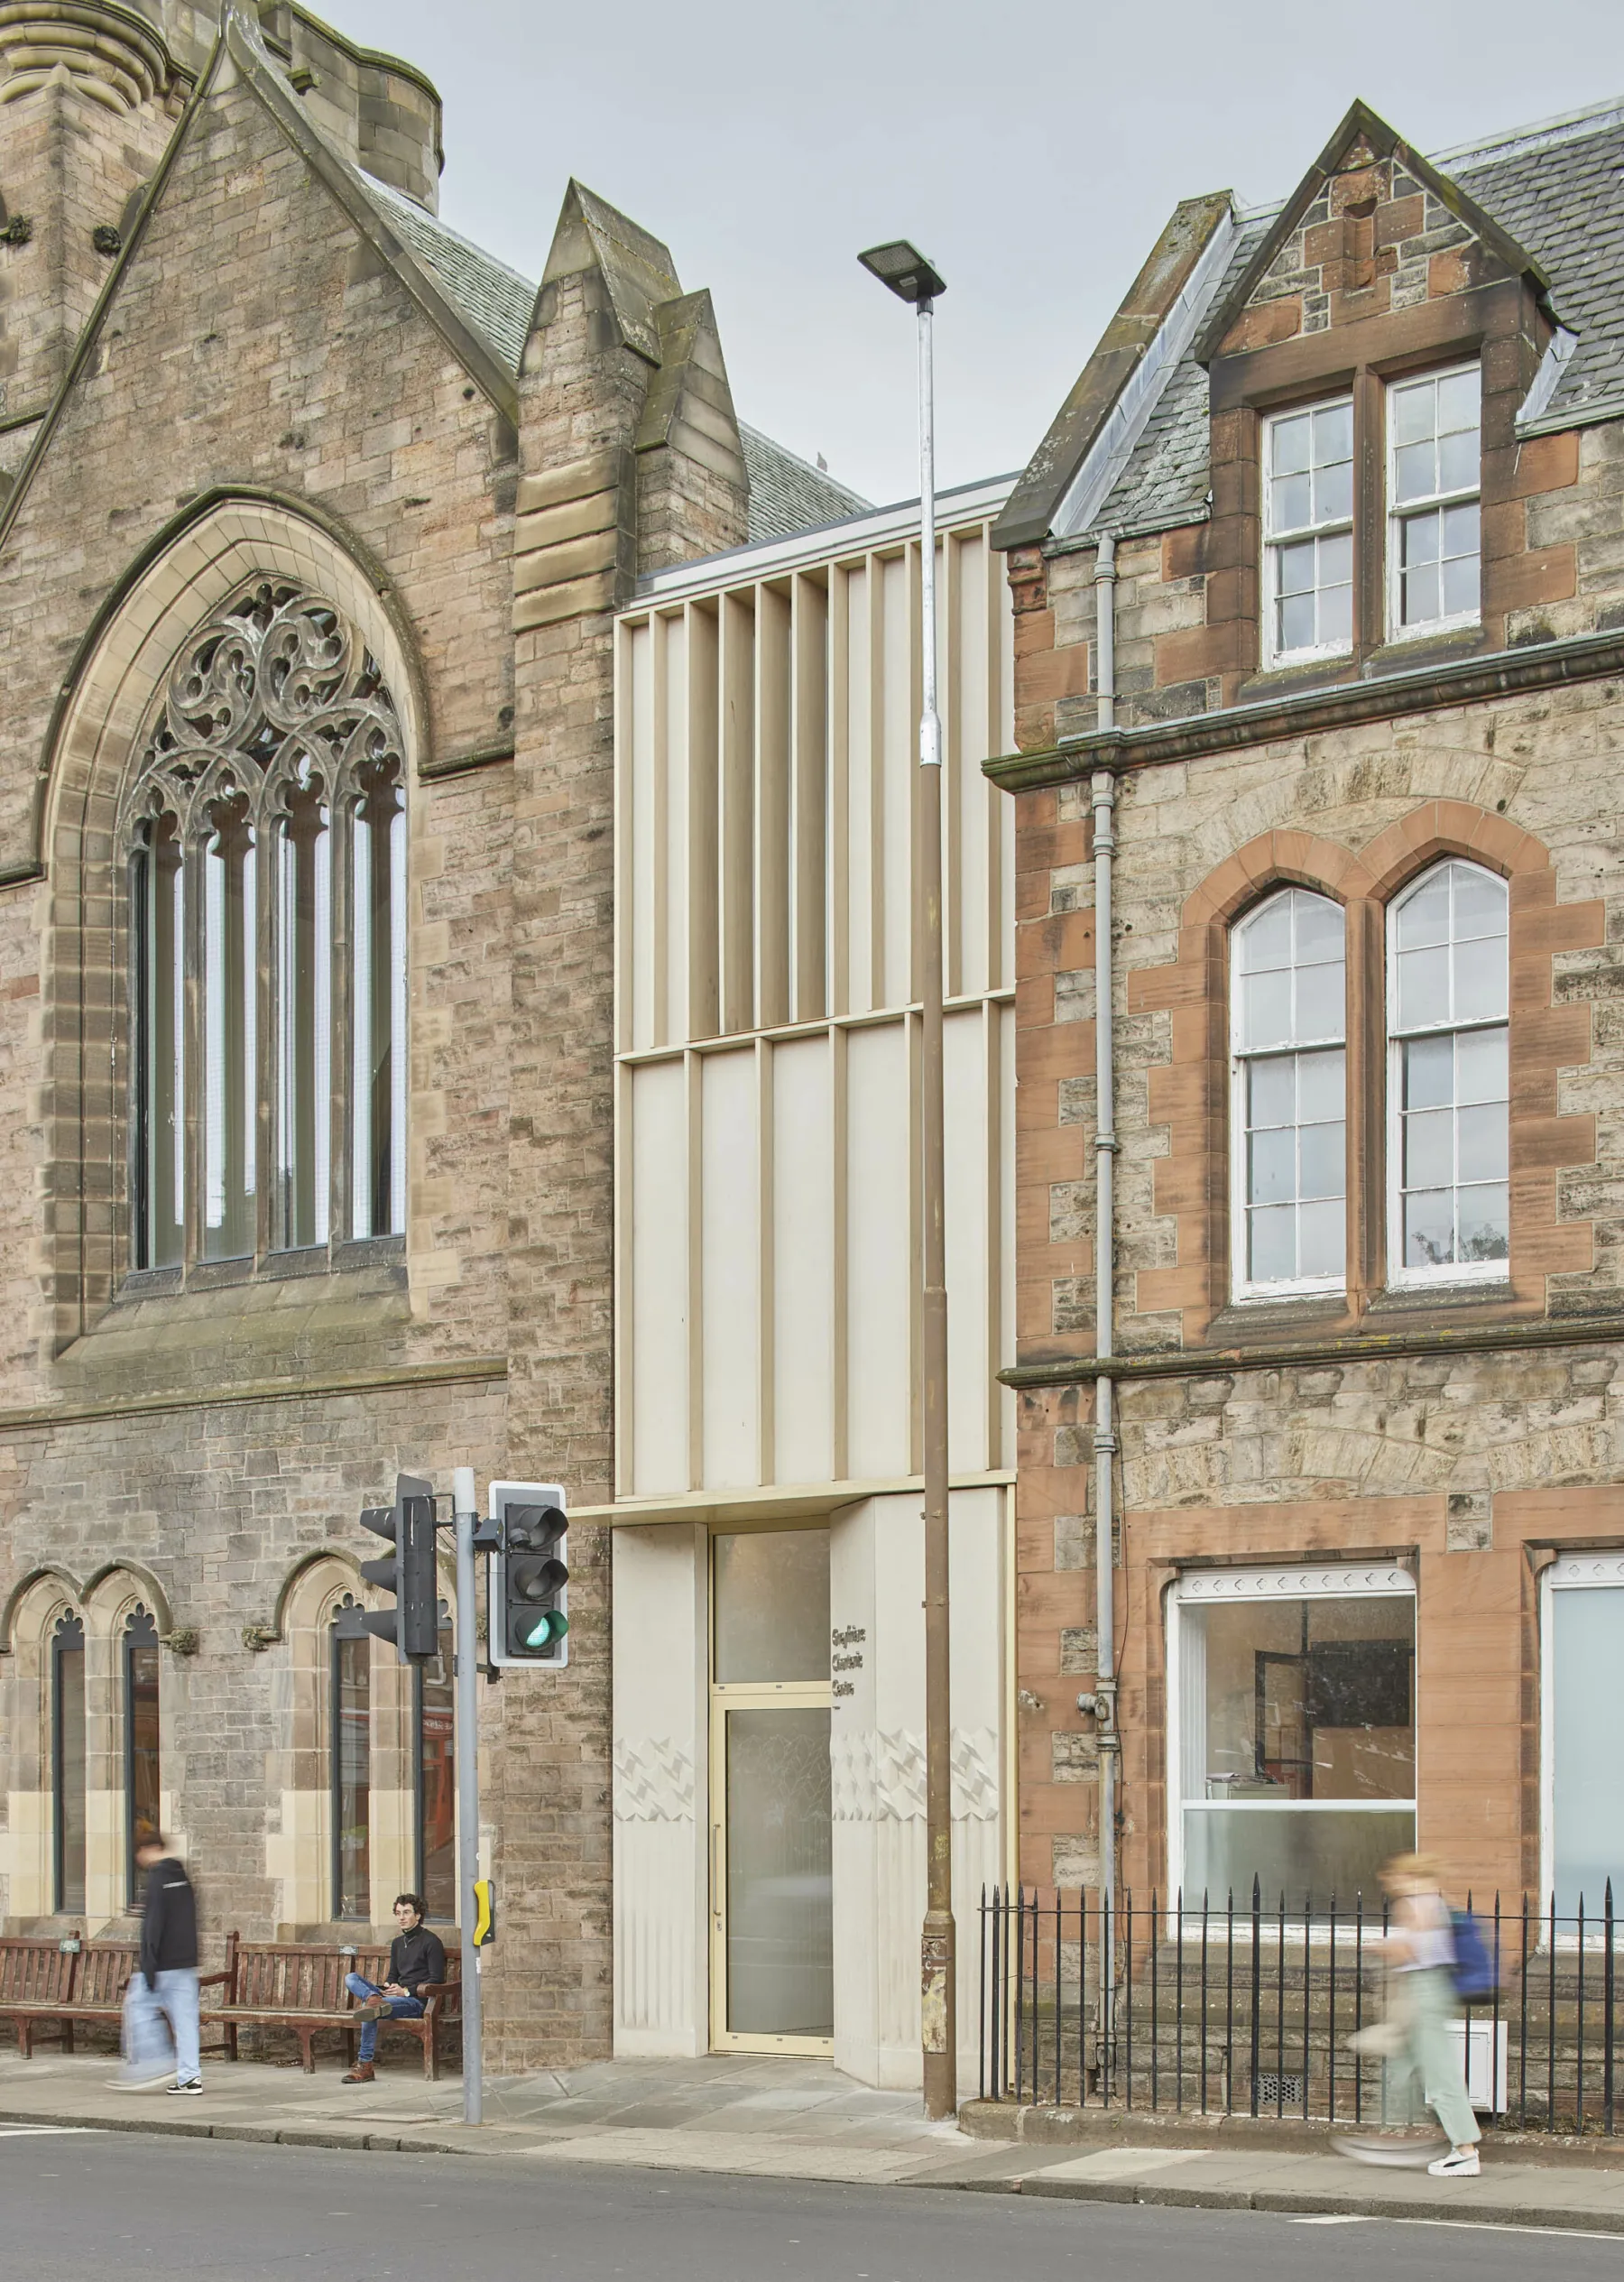 Exterior view of the Greyfriars Charteris Centre showing a section of the former sandstone church and the three storey sandstone office building. In between is the new extension in timber and terrazzo cladding.